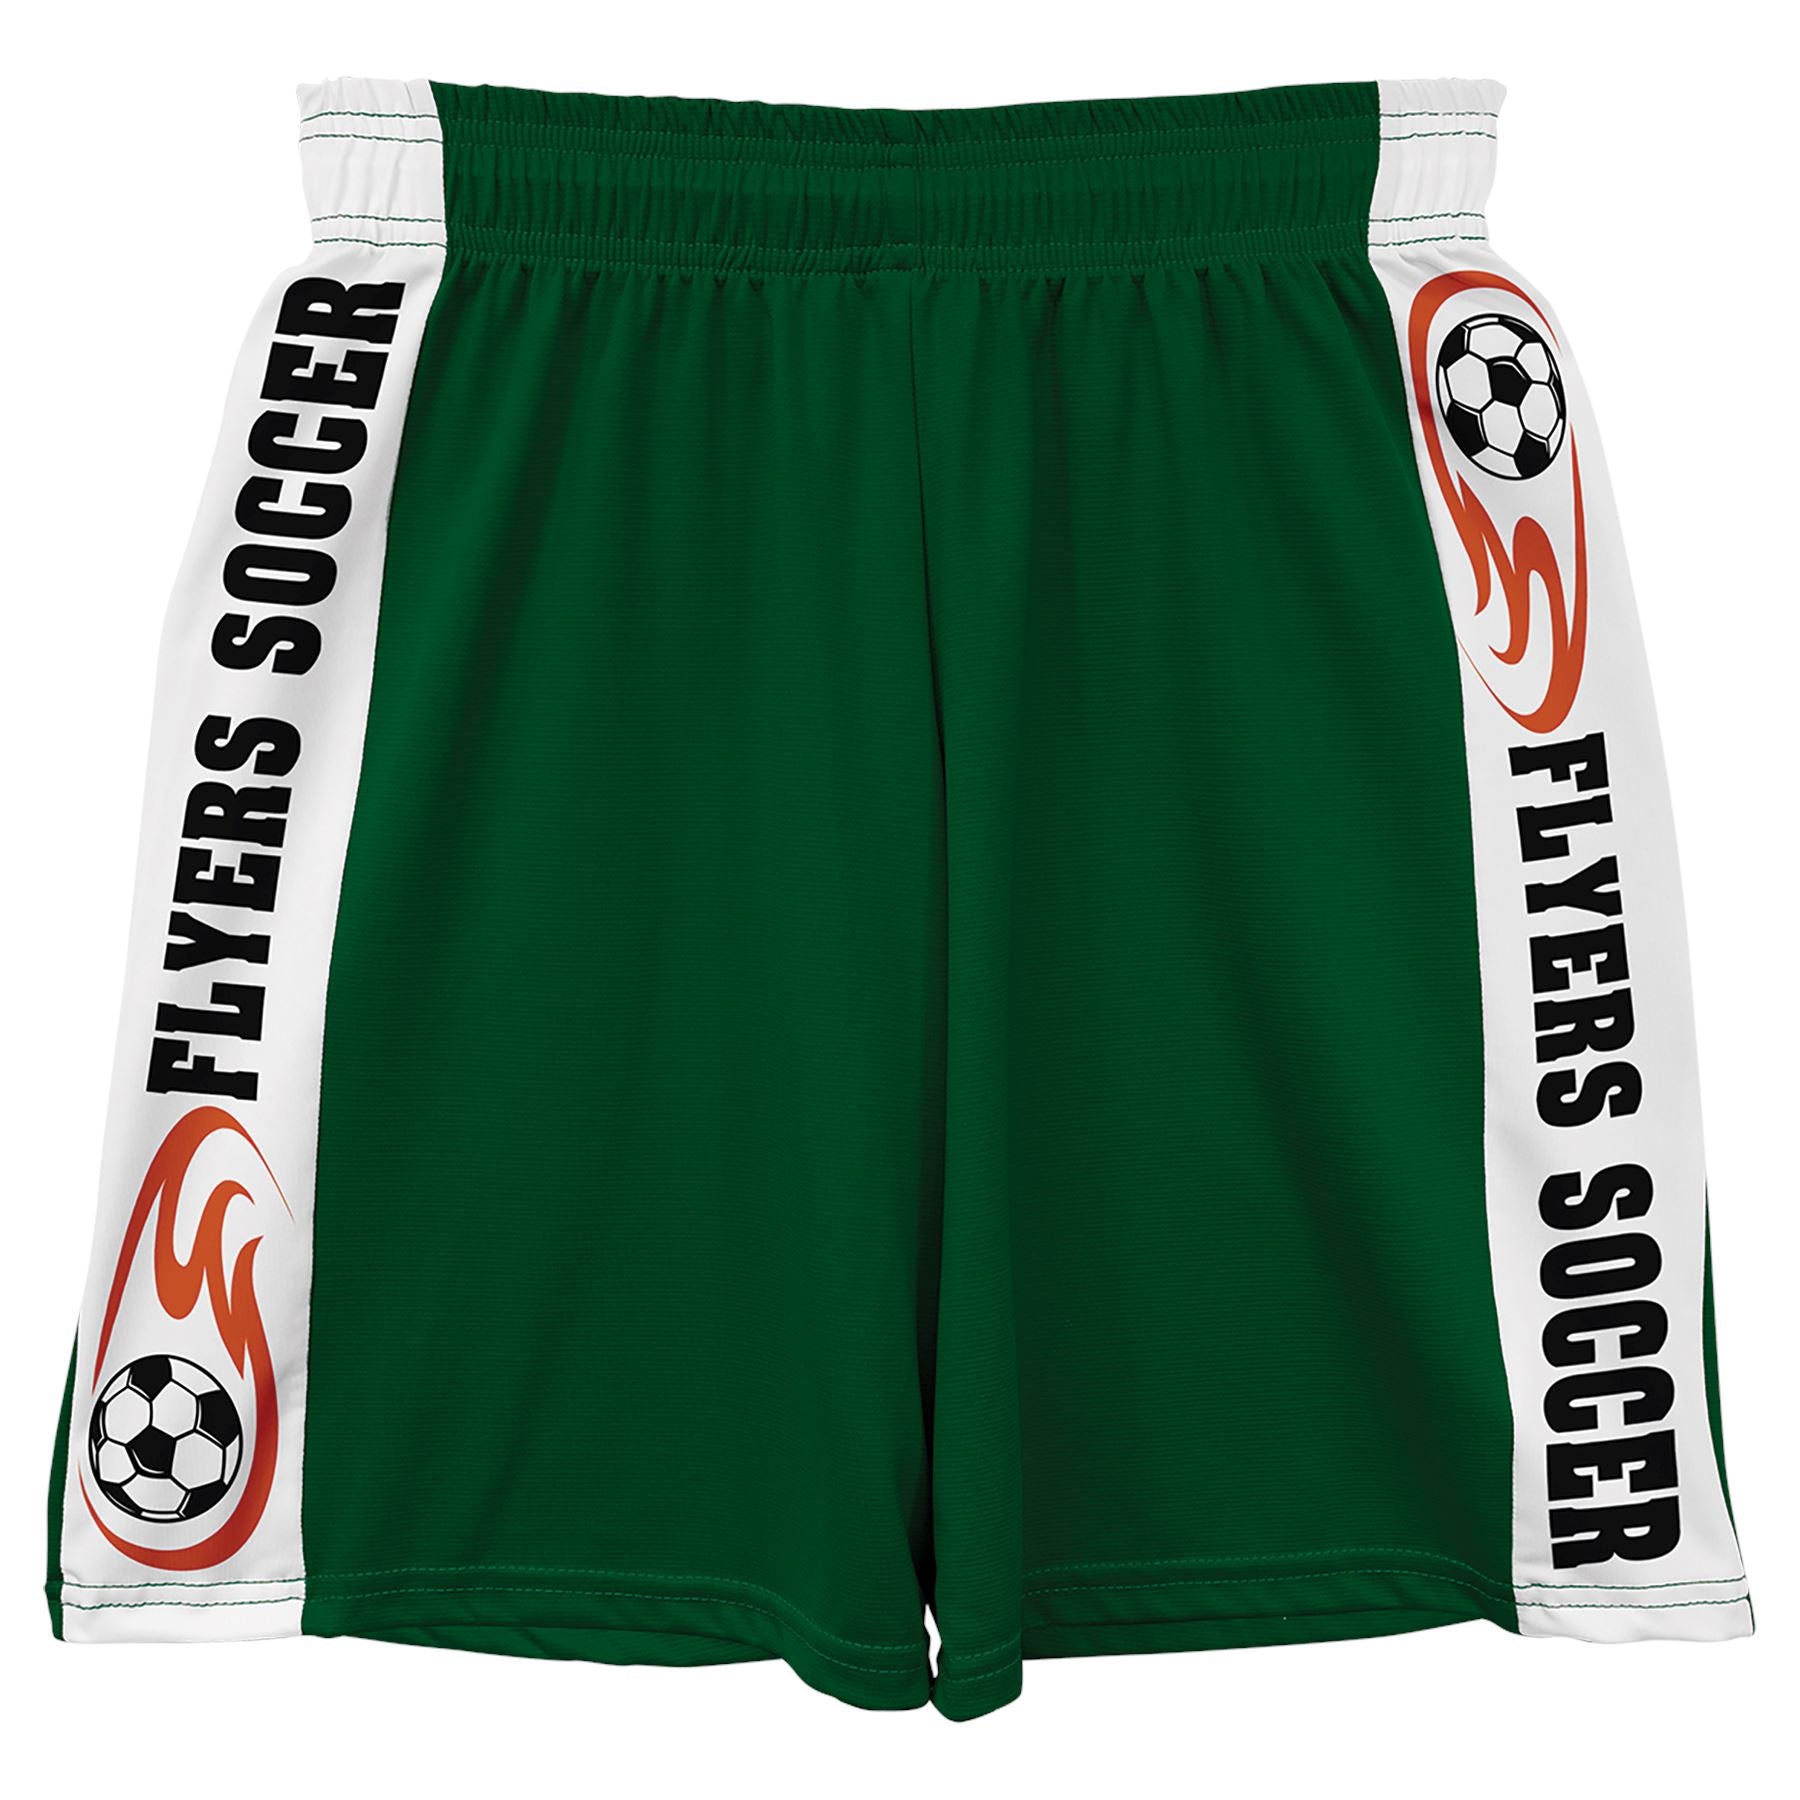 Subli-Tru Shorts, Adult, Full Color Dye Sub Shorts Craftworks NW Forest Green Small 